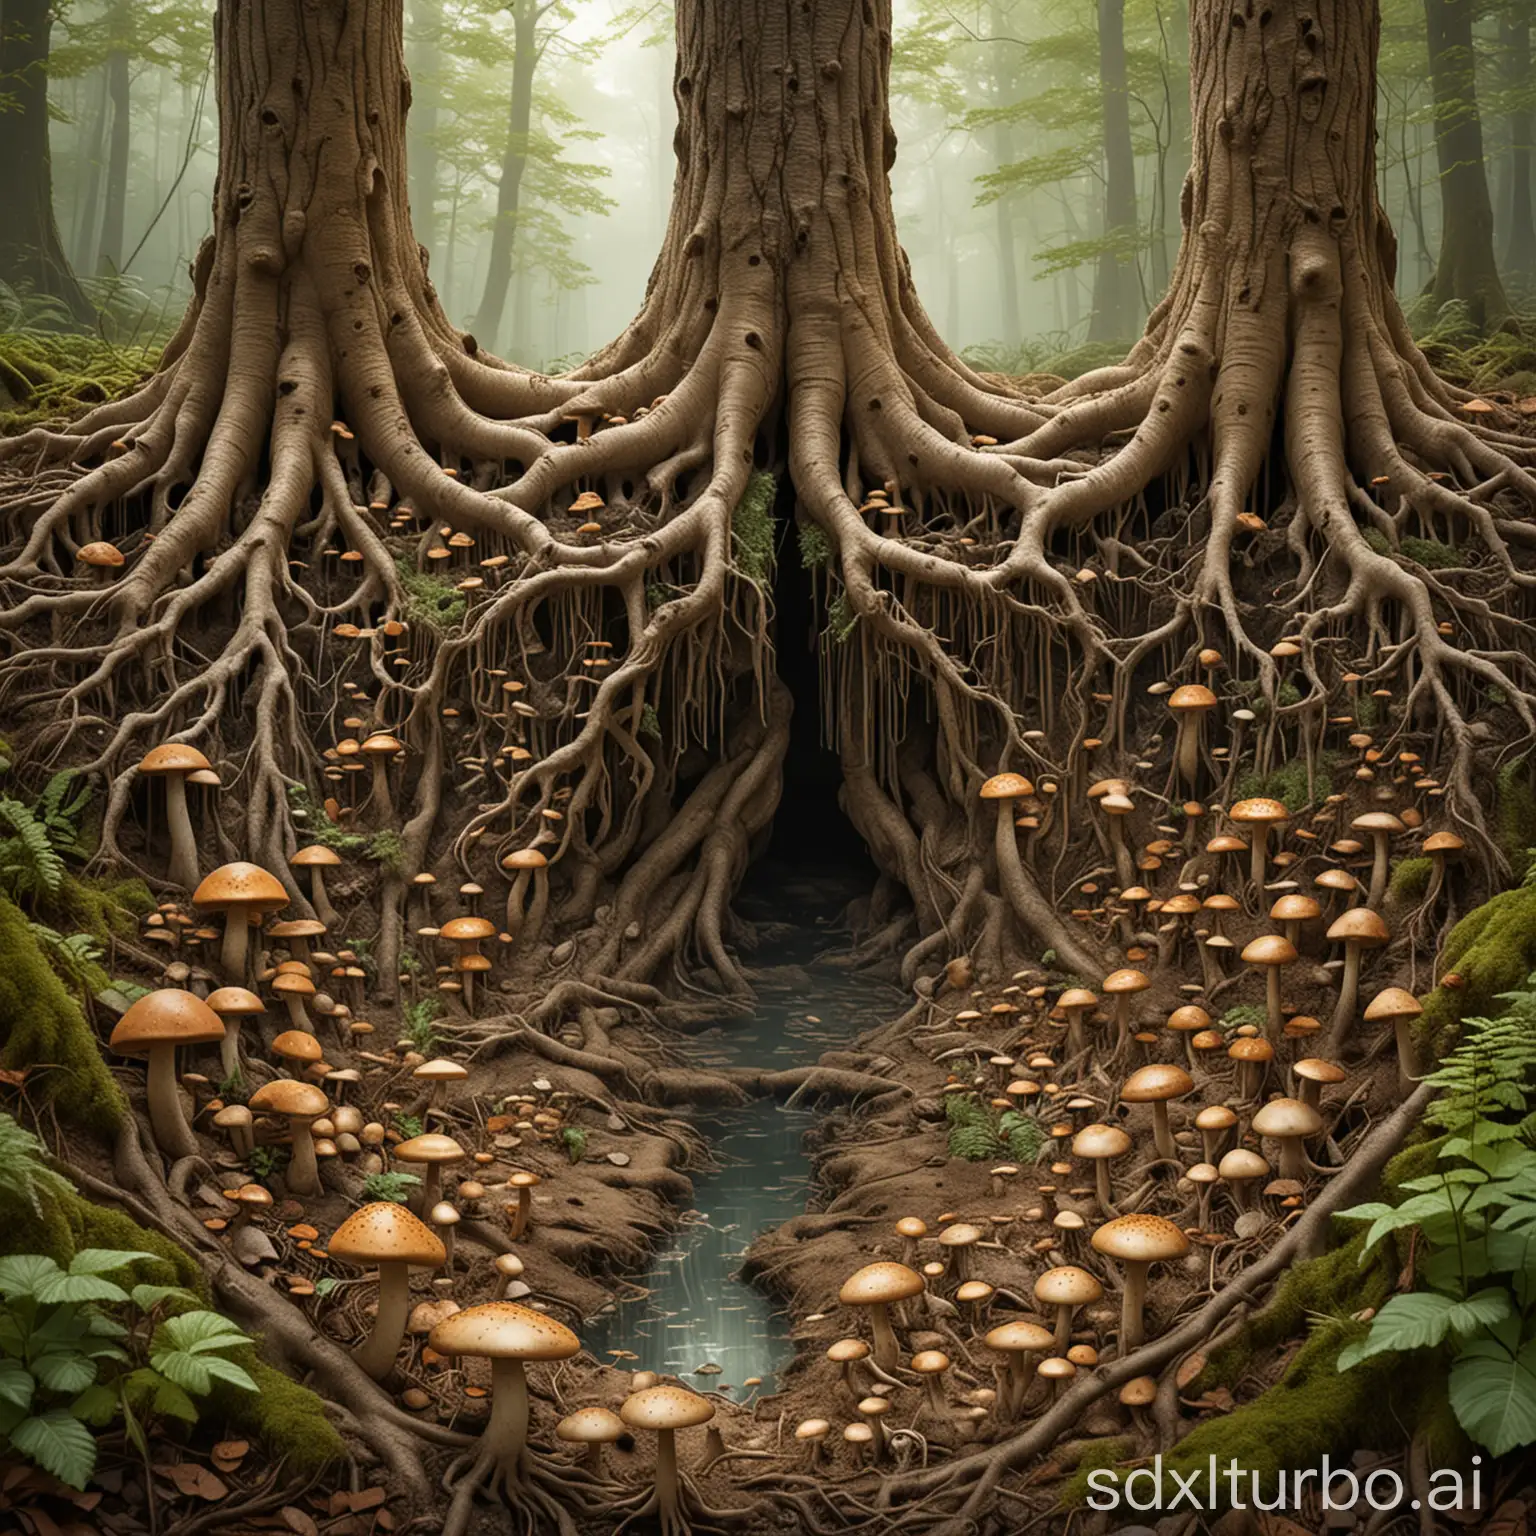 Interconnected-Tree-Root-Network-and-Mushroom-Web-Illustration-of-Underground-Forest-Ecosystem